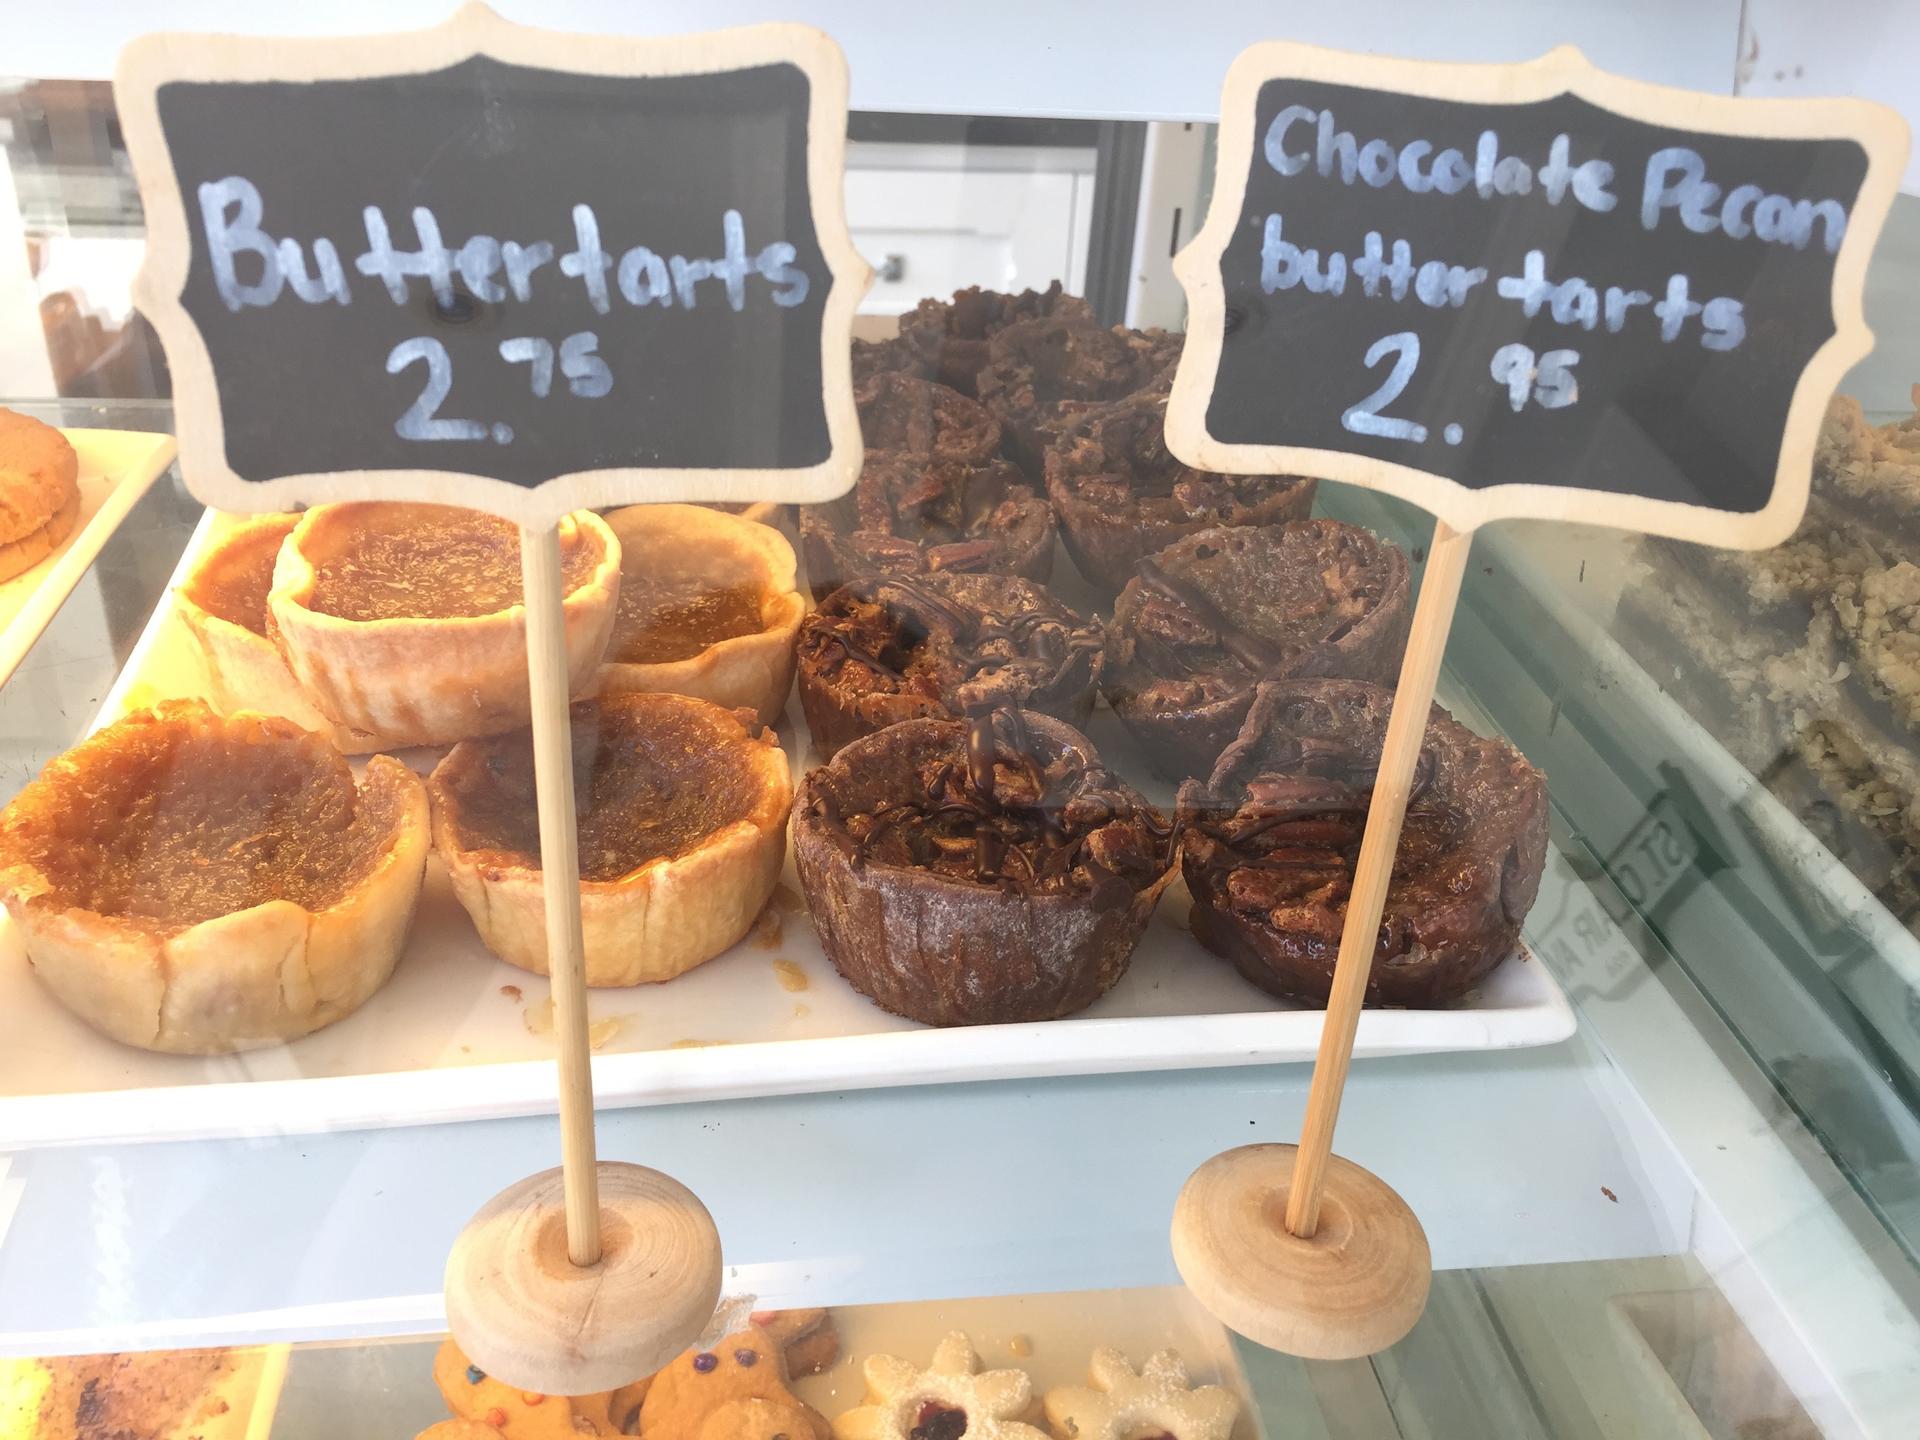 A sampling of the wonderfully sweet butter tarts baked fresh daily at Leah's Bakery in Toronto.